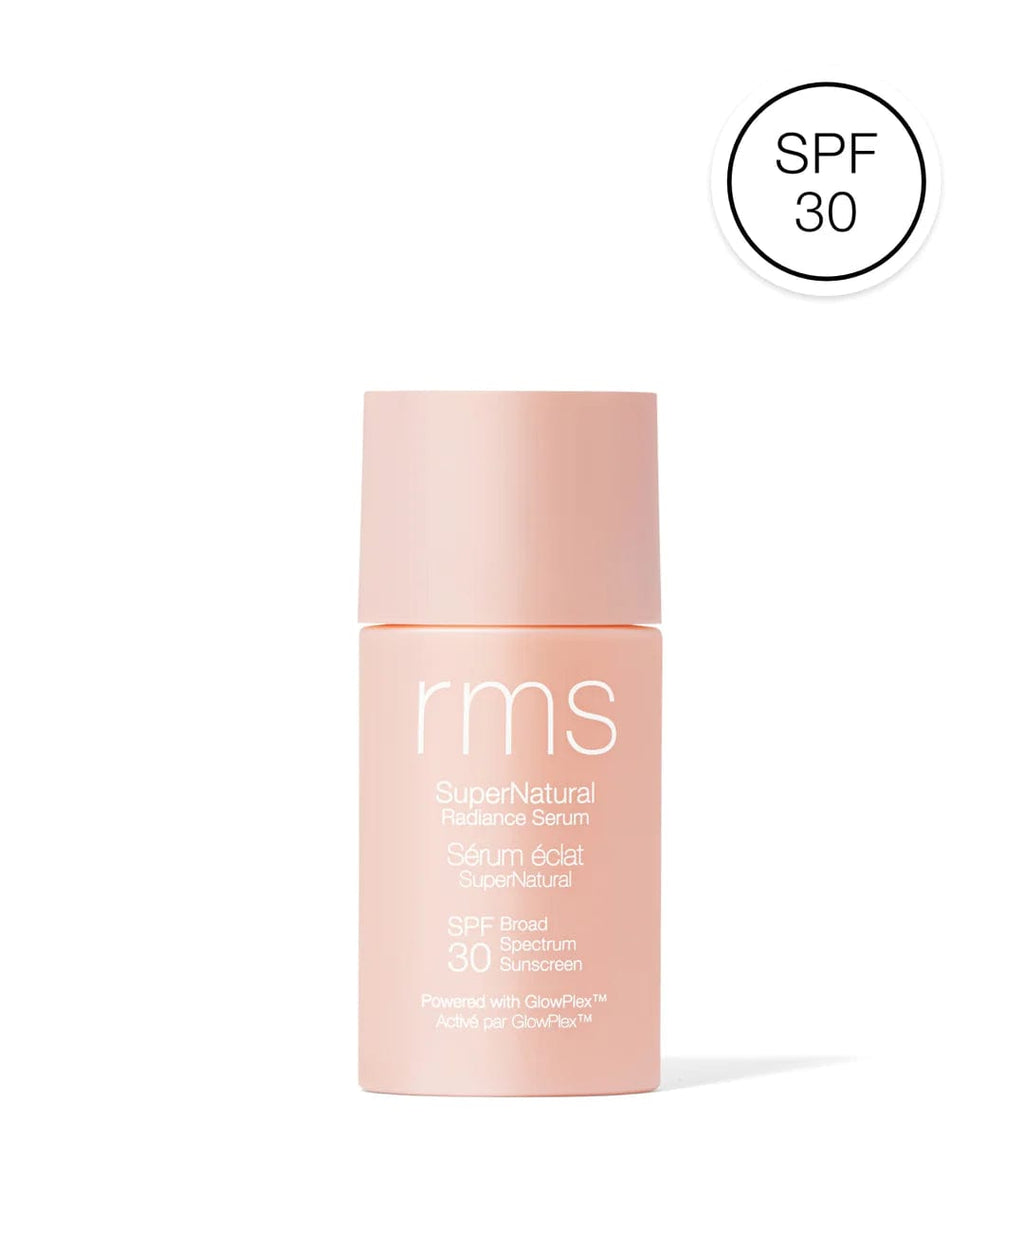 RMS - Super Natural Radiance Serum Broad Spectrum SPF 30 Sunscreen - The Natural Beauty Club